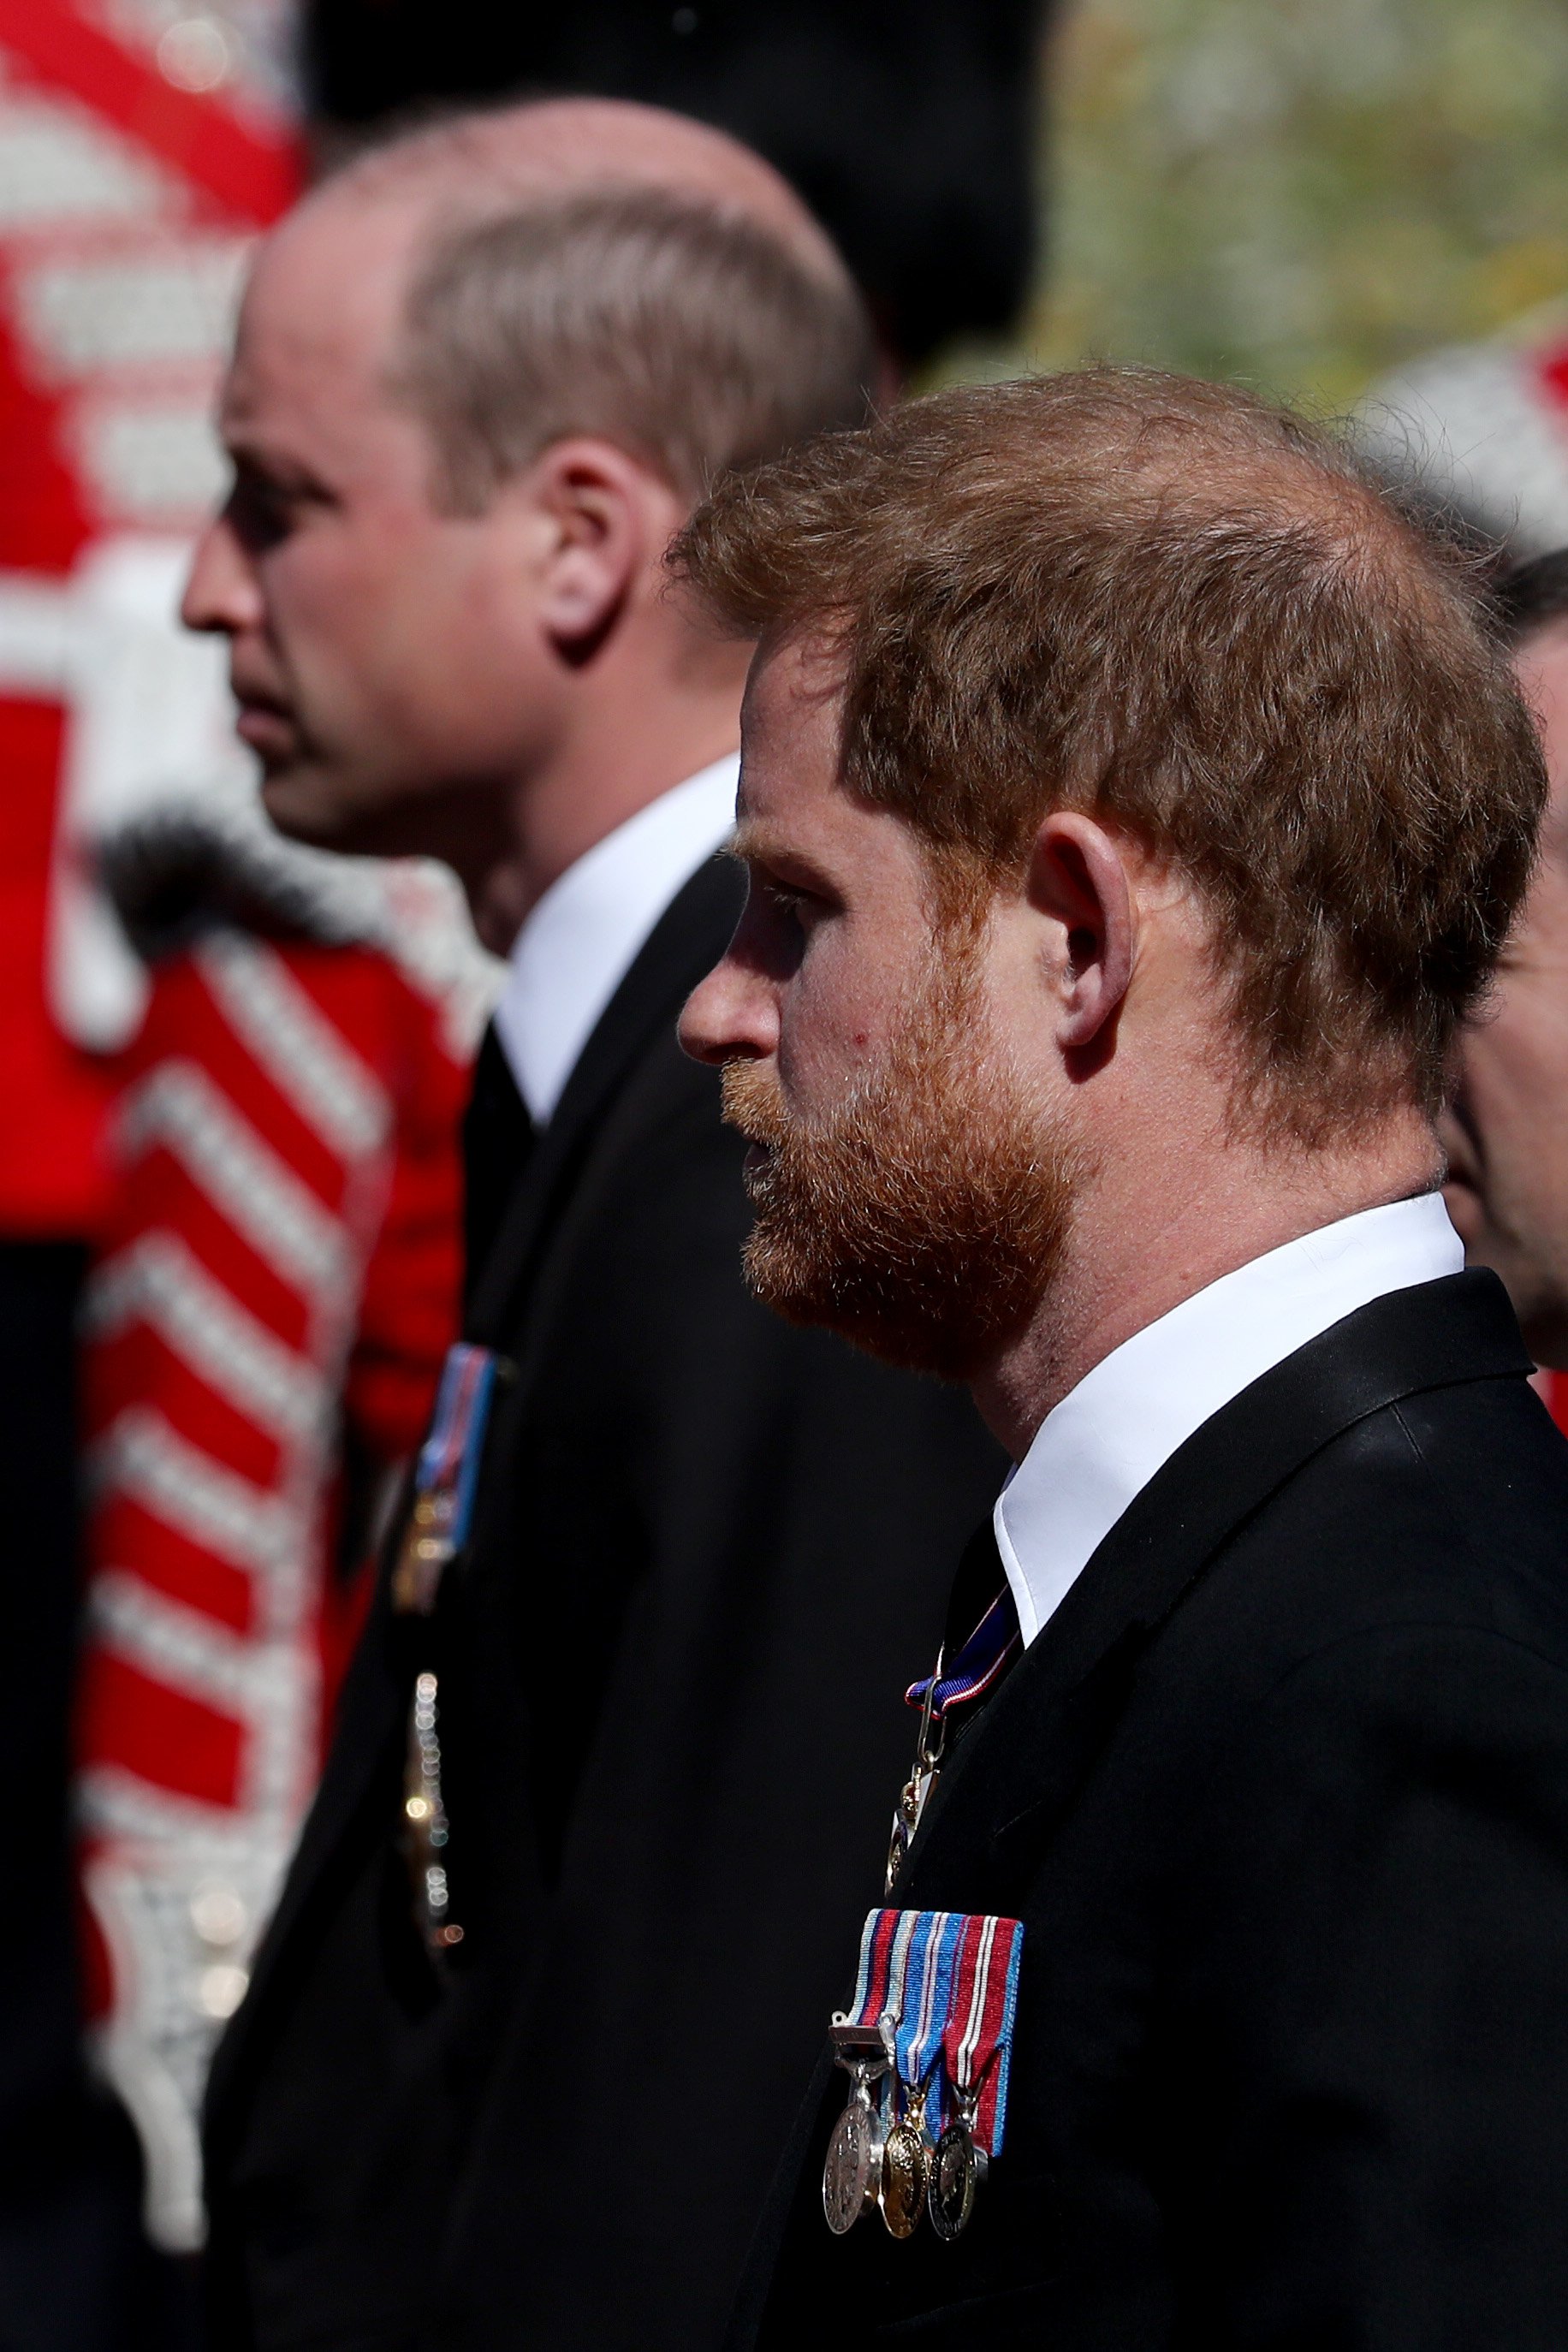 Prince William and Prince Harry during the funeral of Prince Philip at Windsor Castle on April 17, 2021 in Windsor, England. | Source: Getty Images